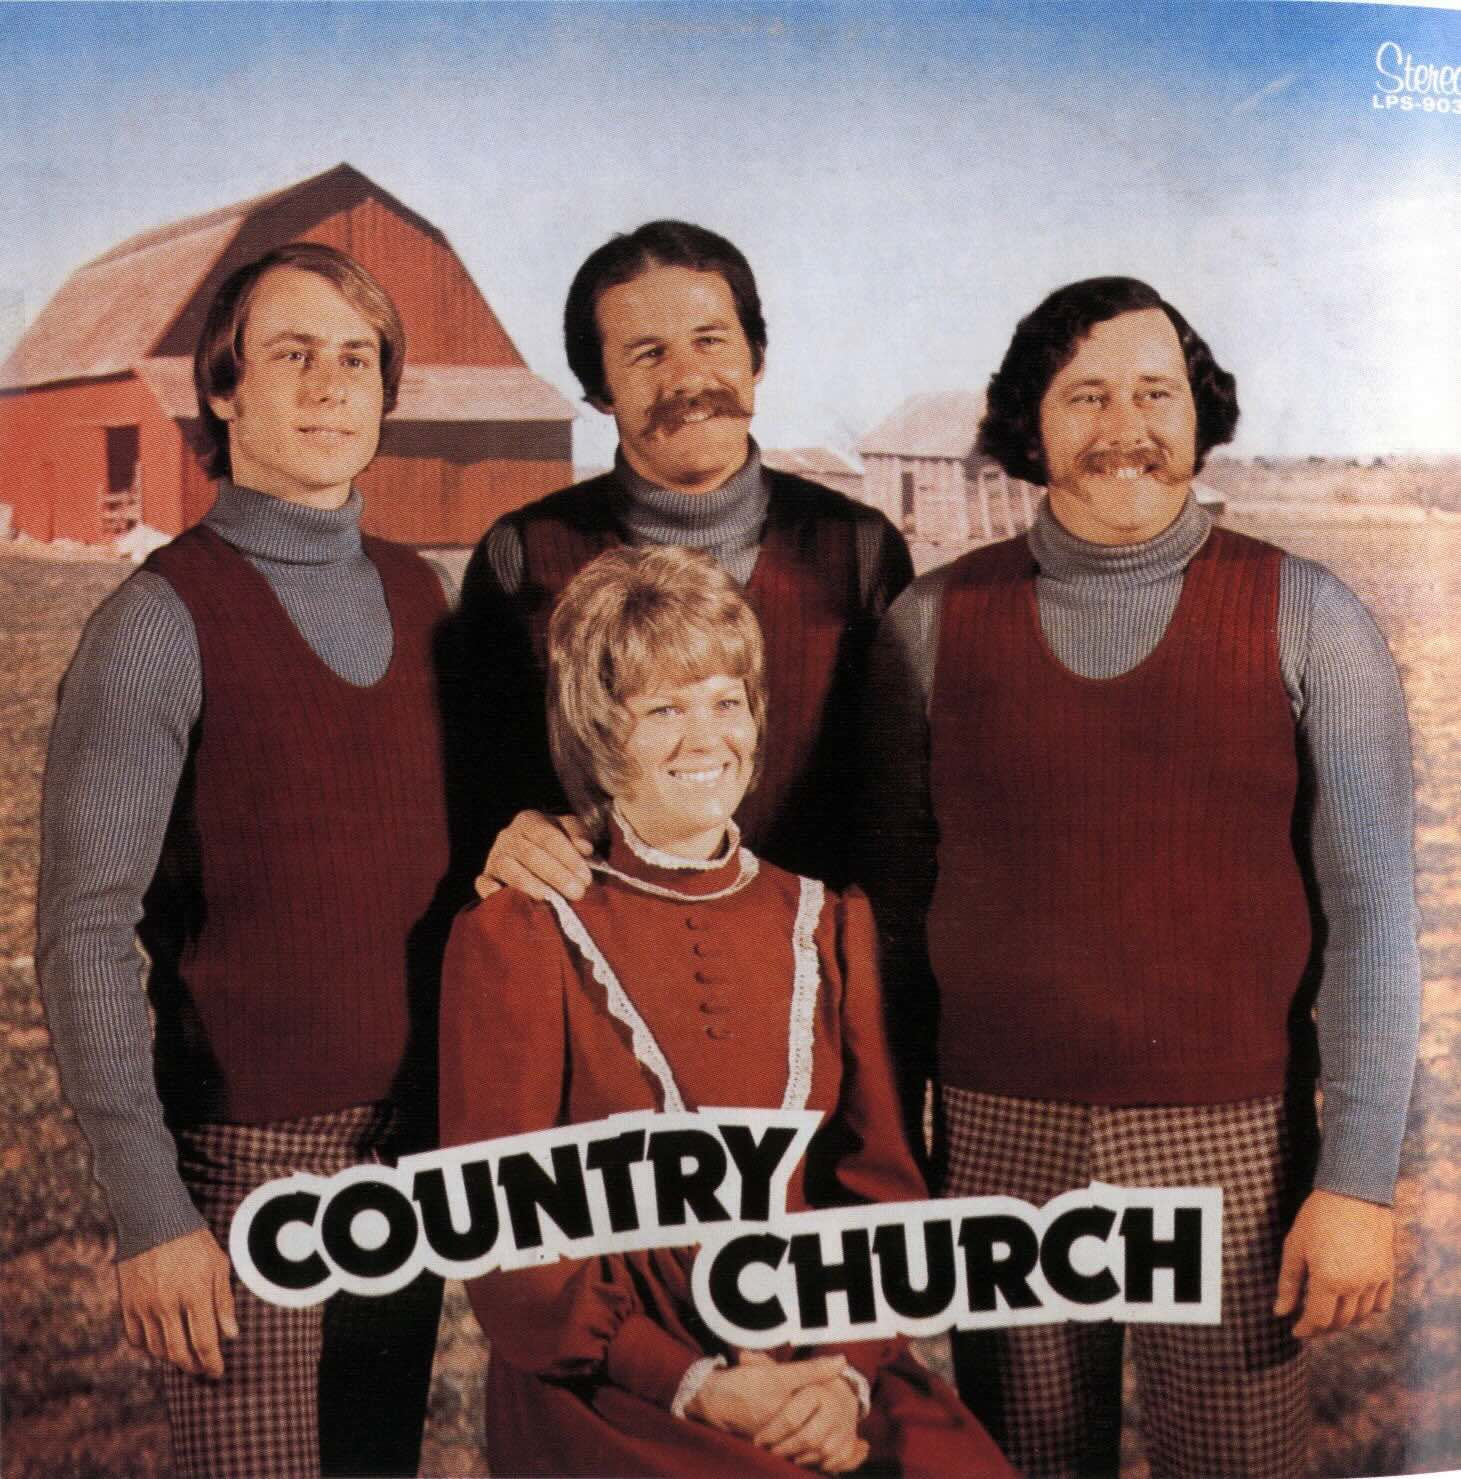 Christian album covers_journal of wild culture